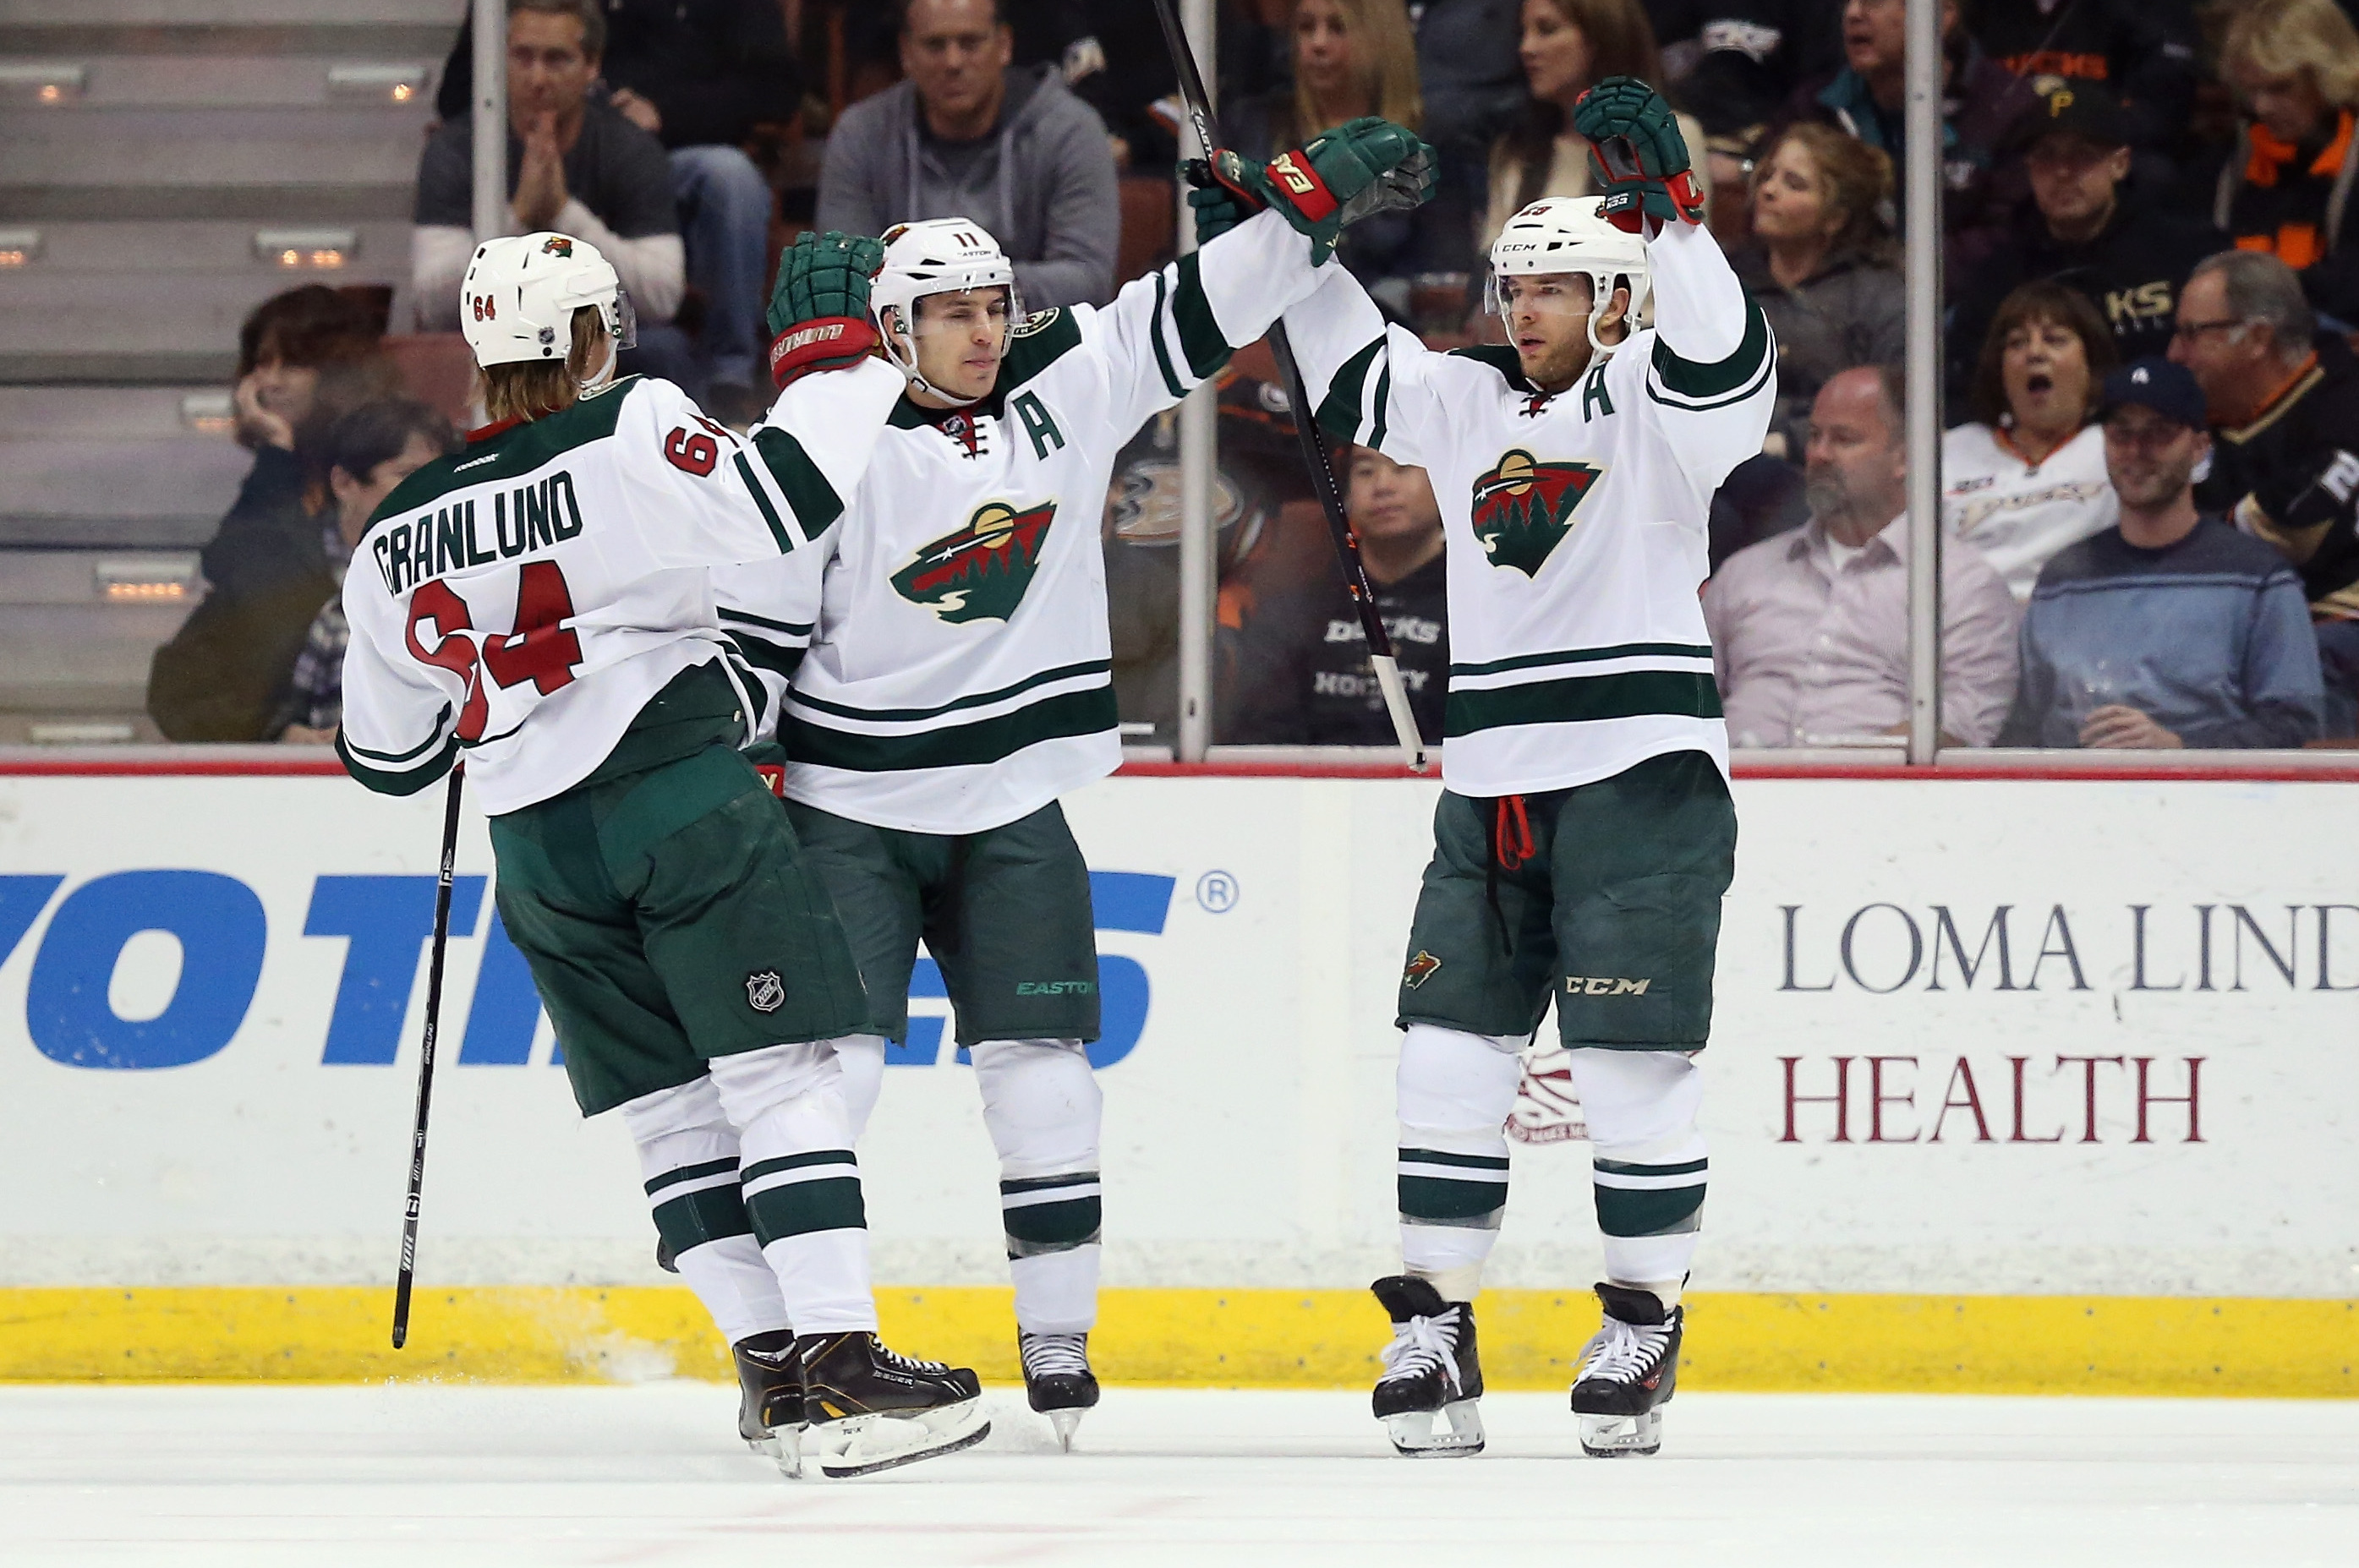 The Minnesota Wild's Mikael Granlund (64) takes a moment to greet